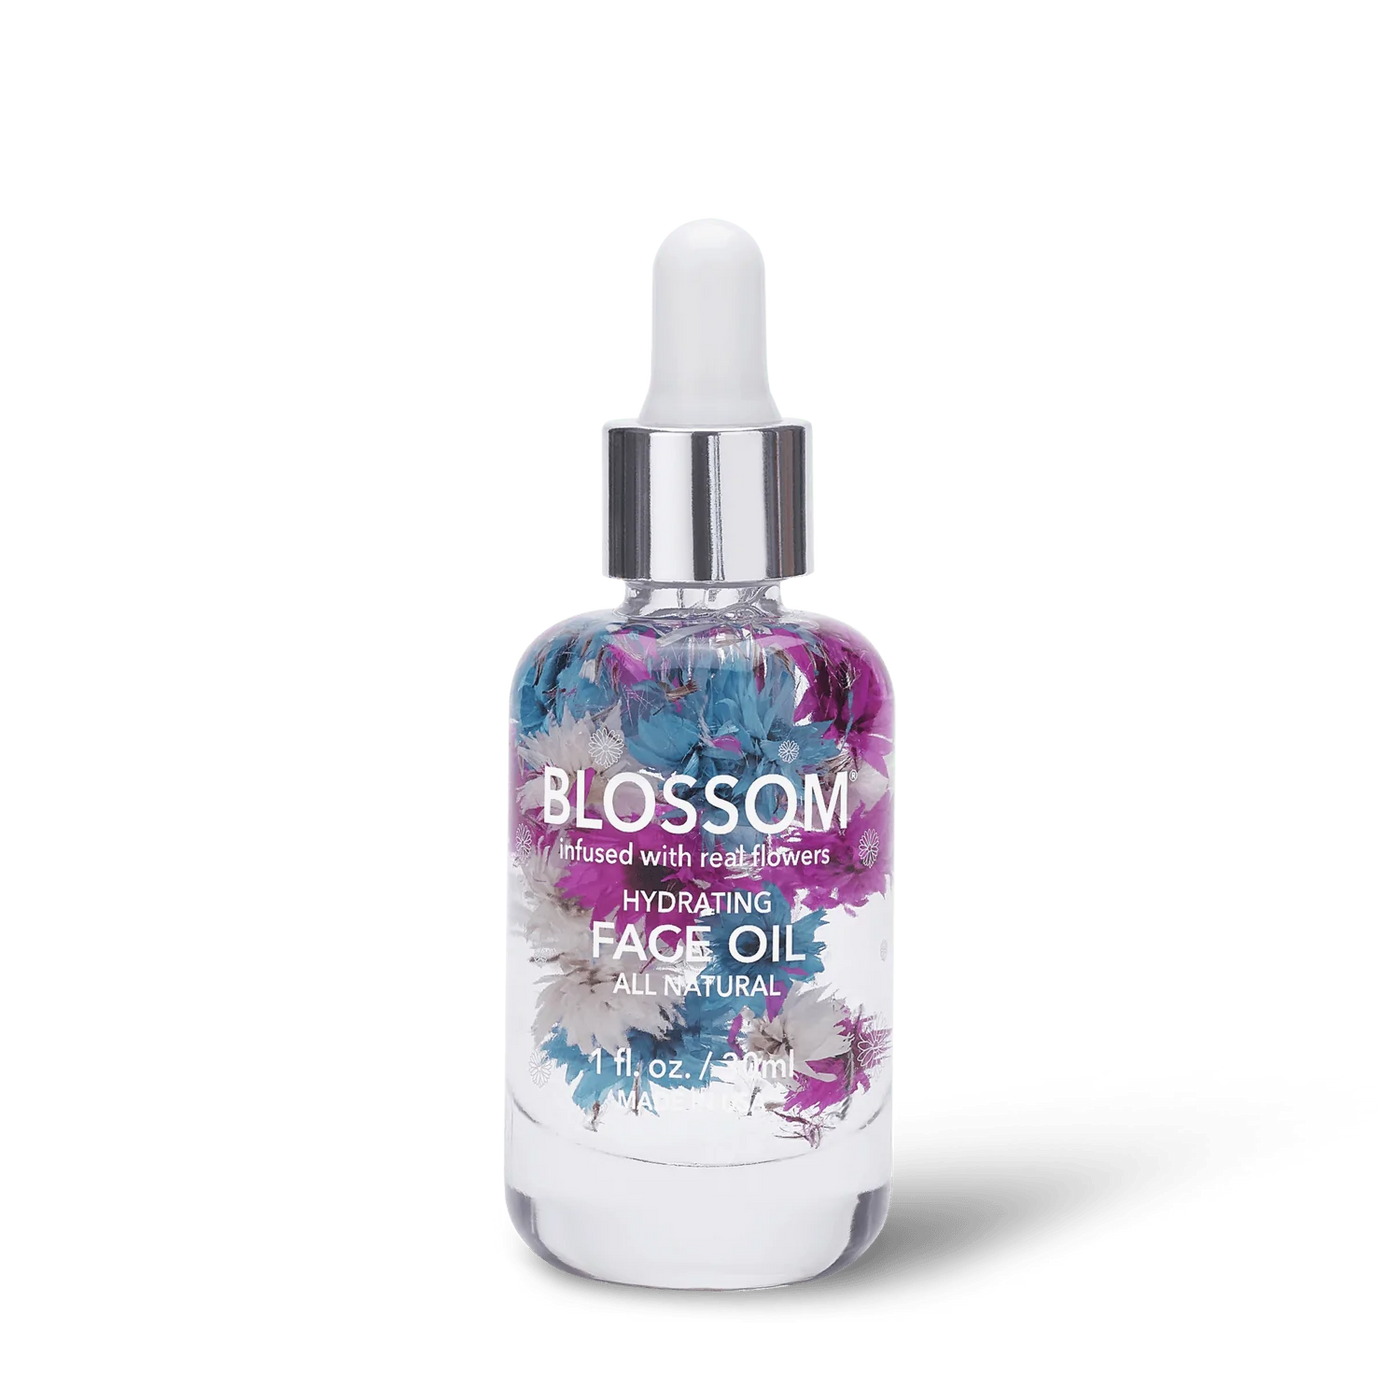 Blossom All-Natural & Hydrating Face Oil